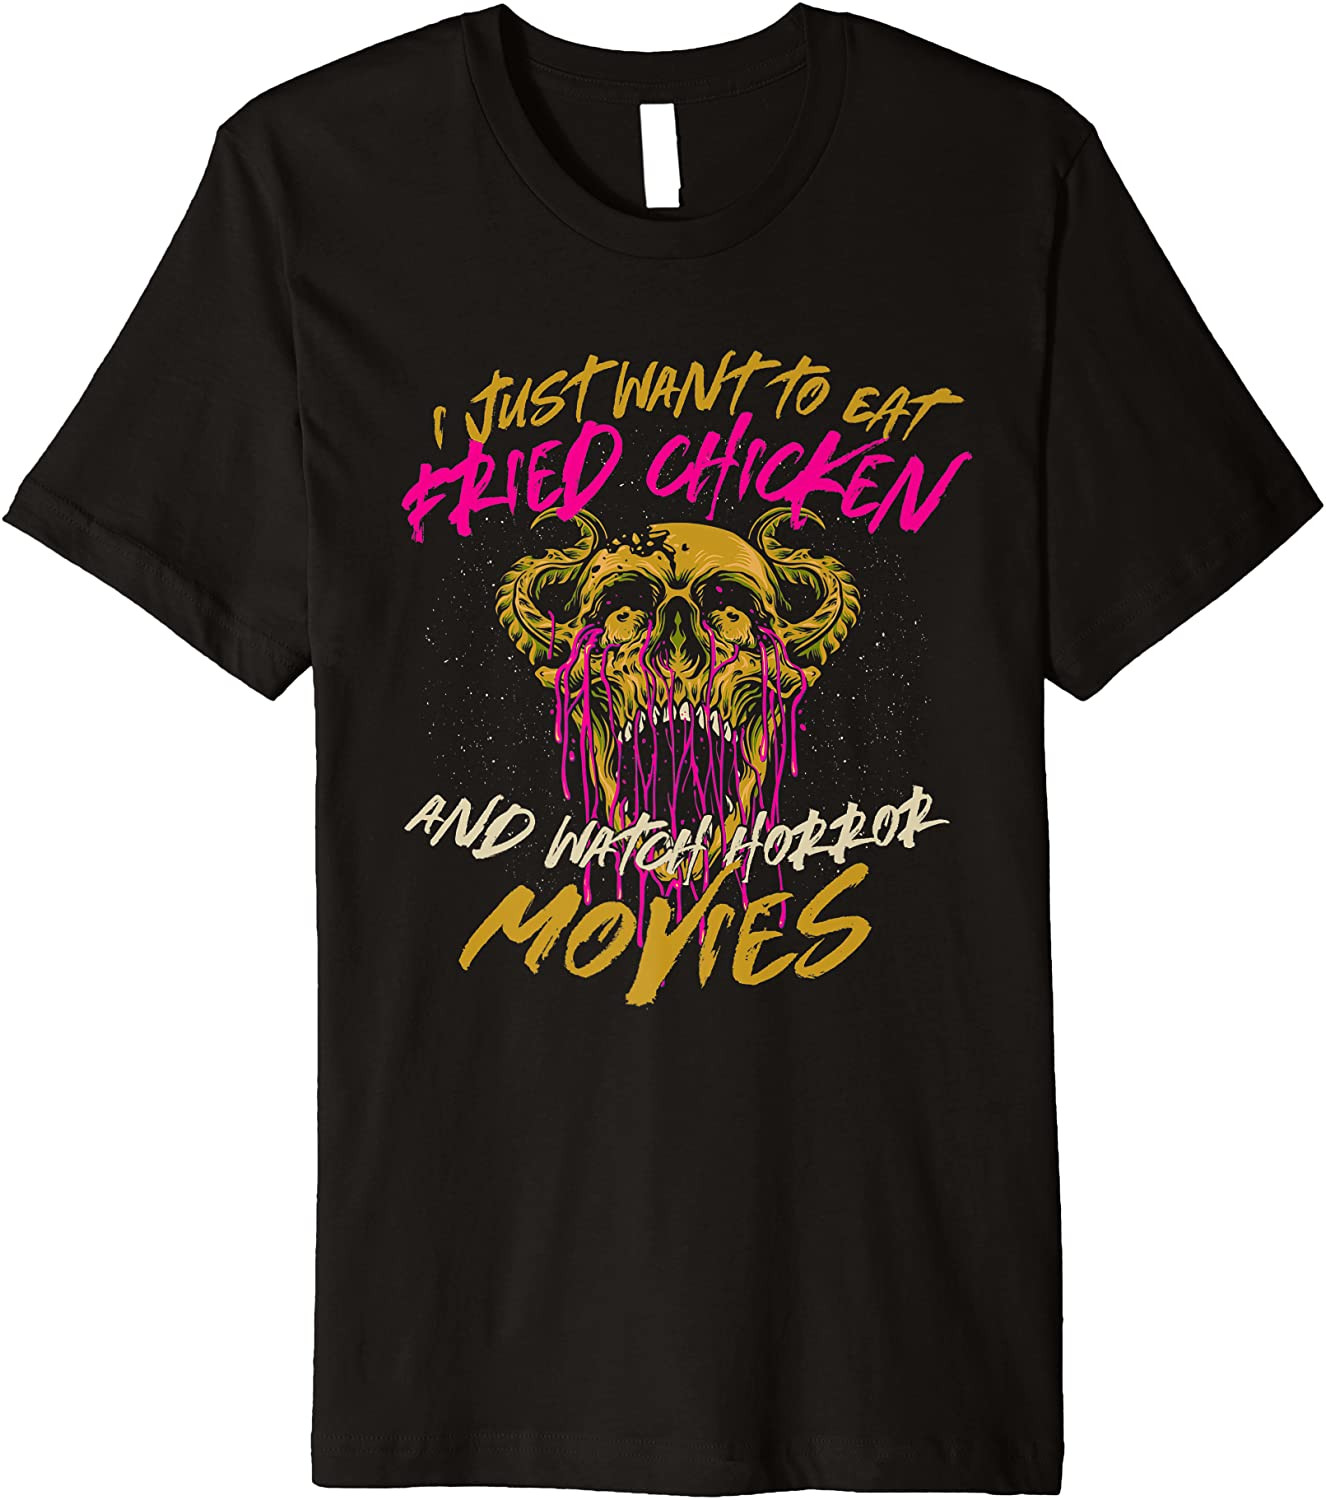 Eat Fried Chicken And Watch Horror Movies Comfort Food T-Shirt